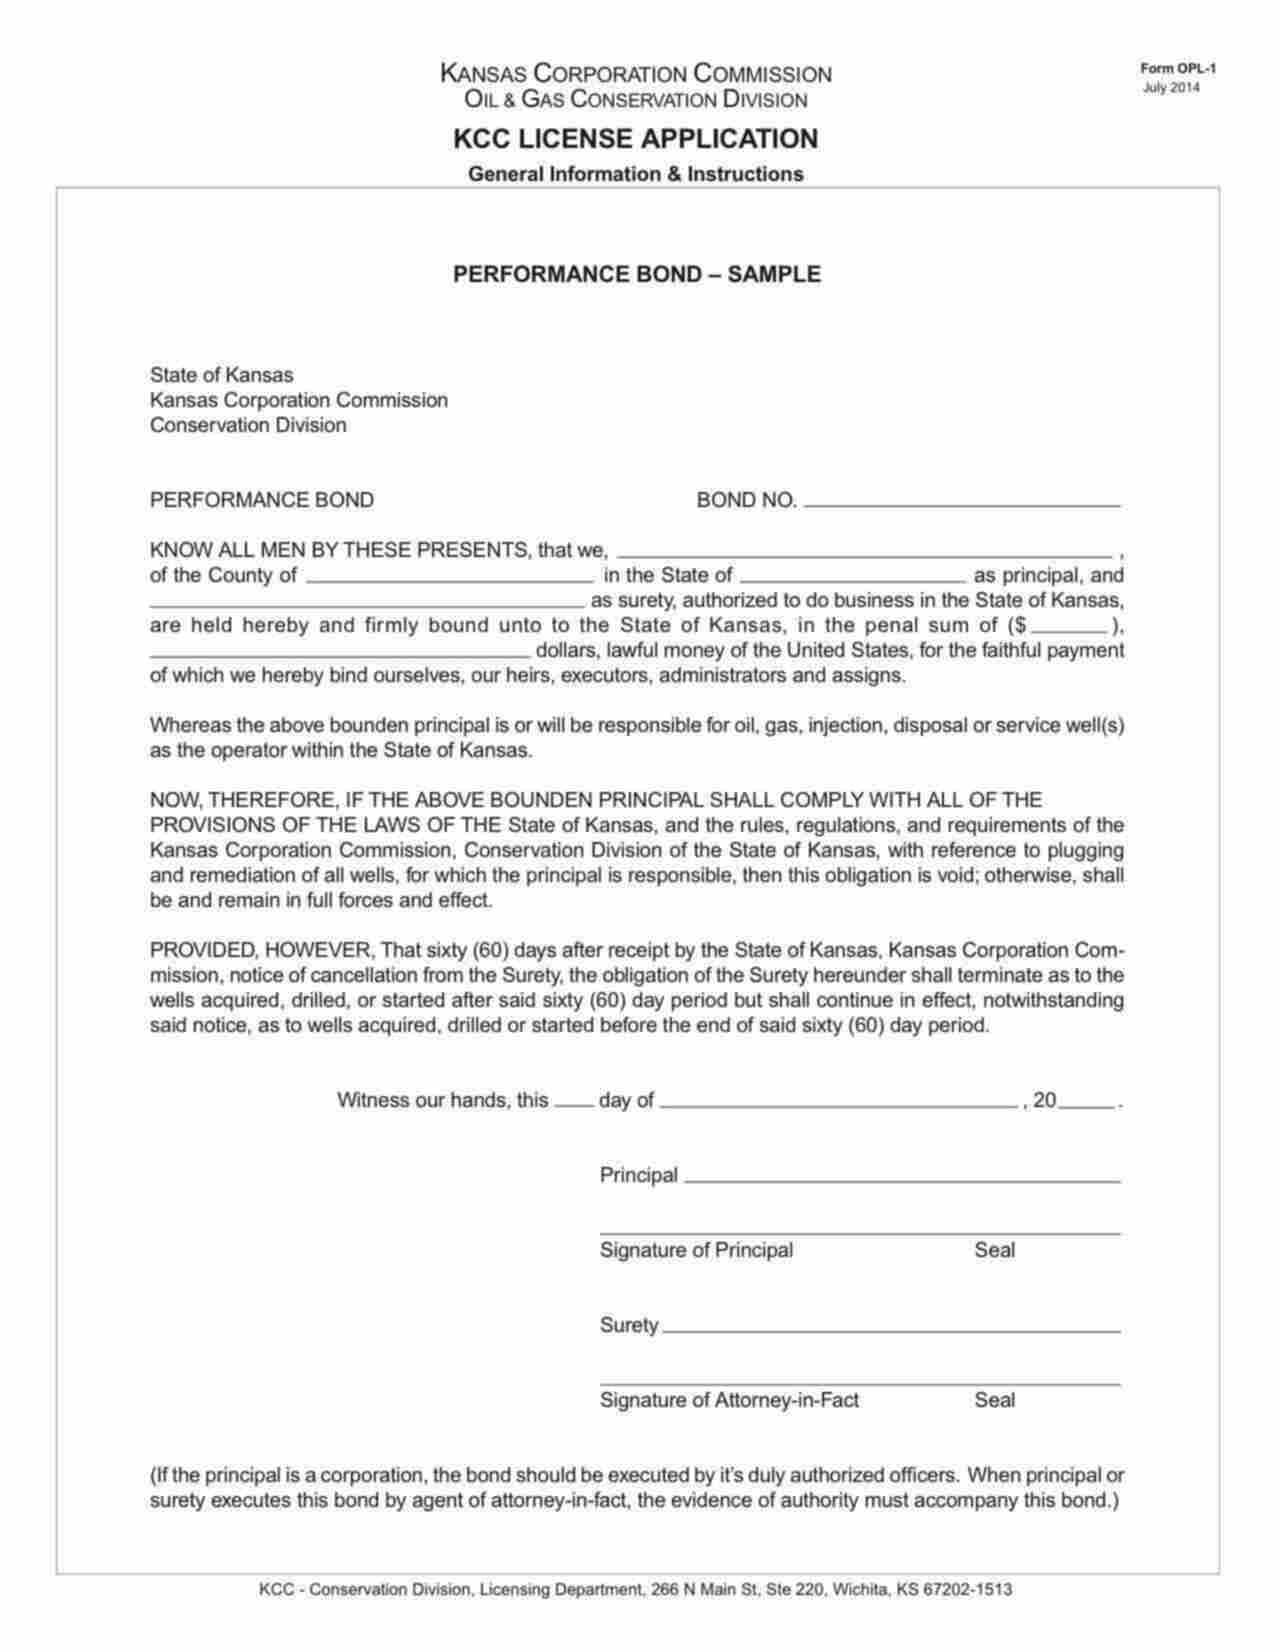 Kansas Oil, Gas, Injection, Disposal or Service Well Operator Bond Form